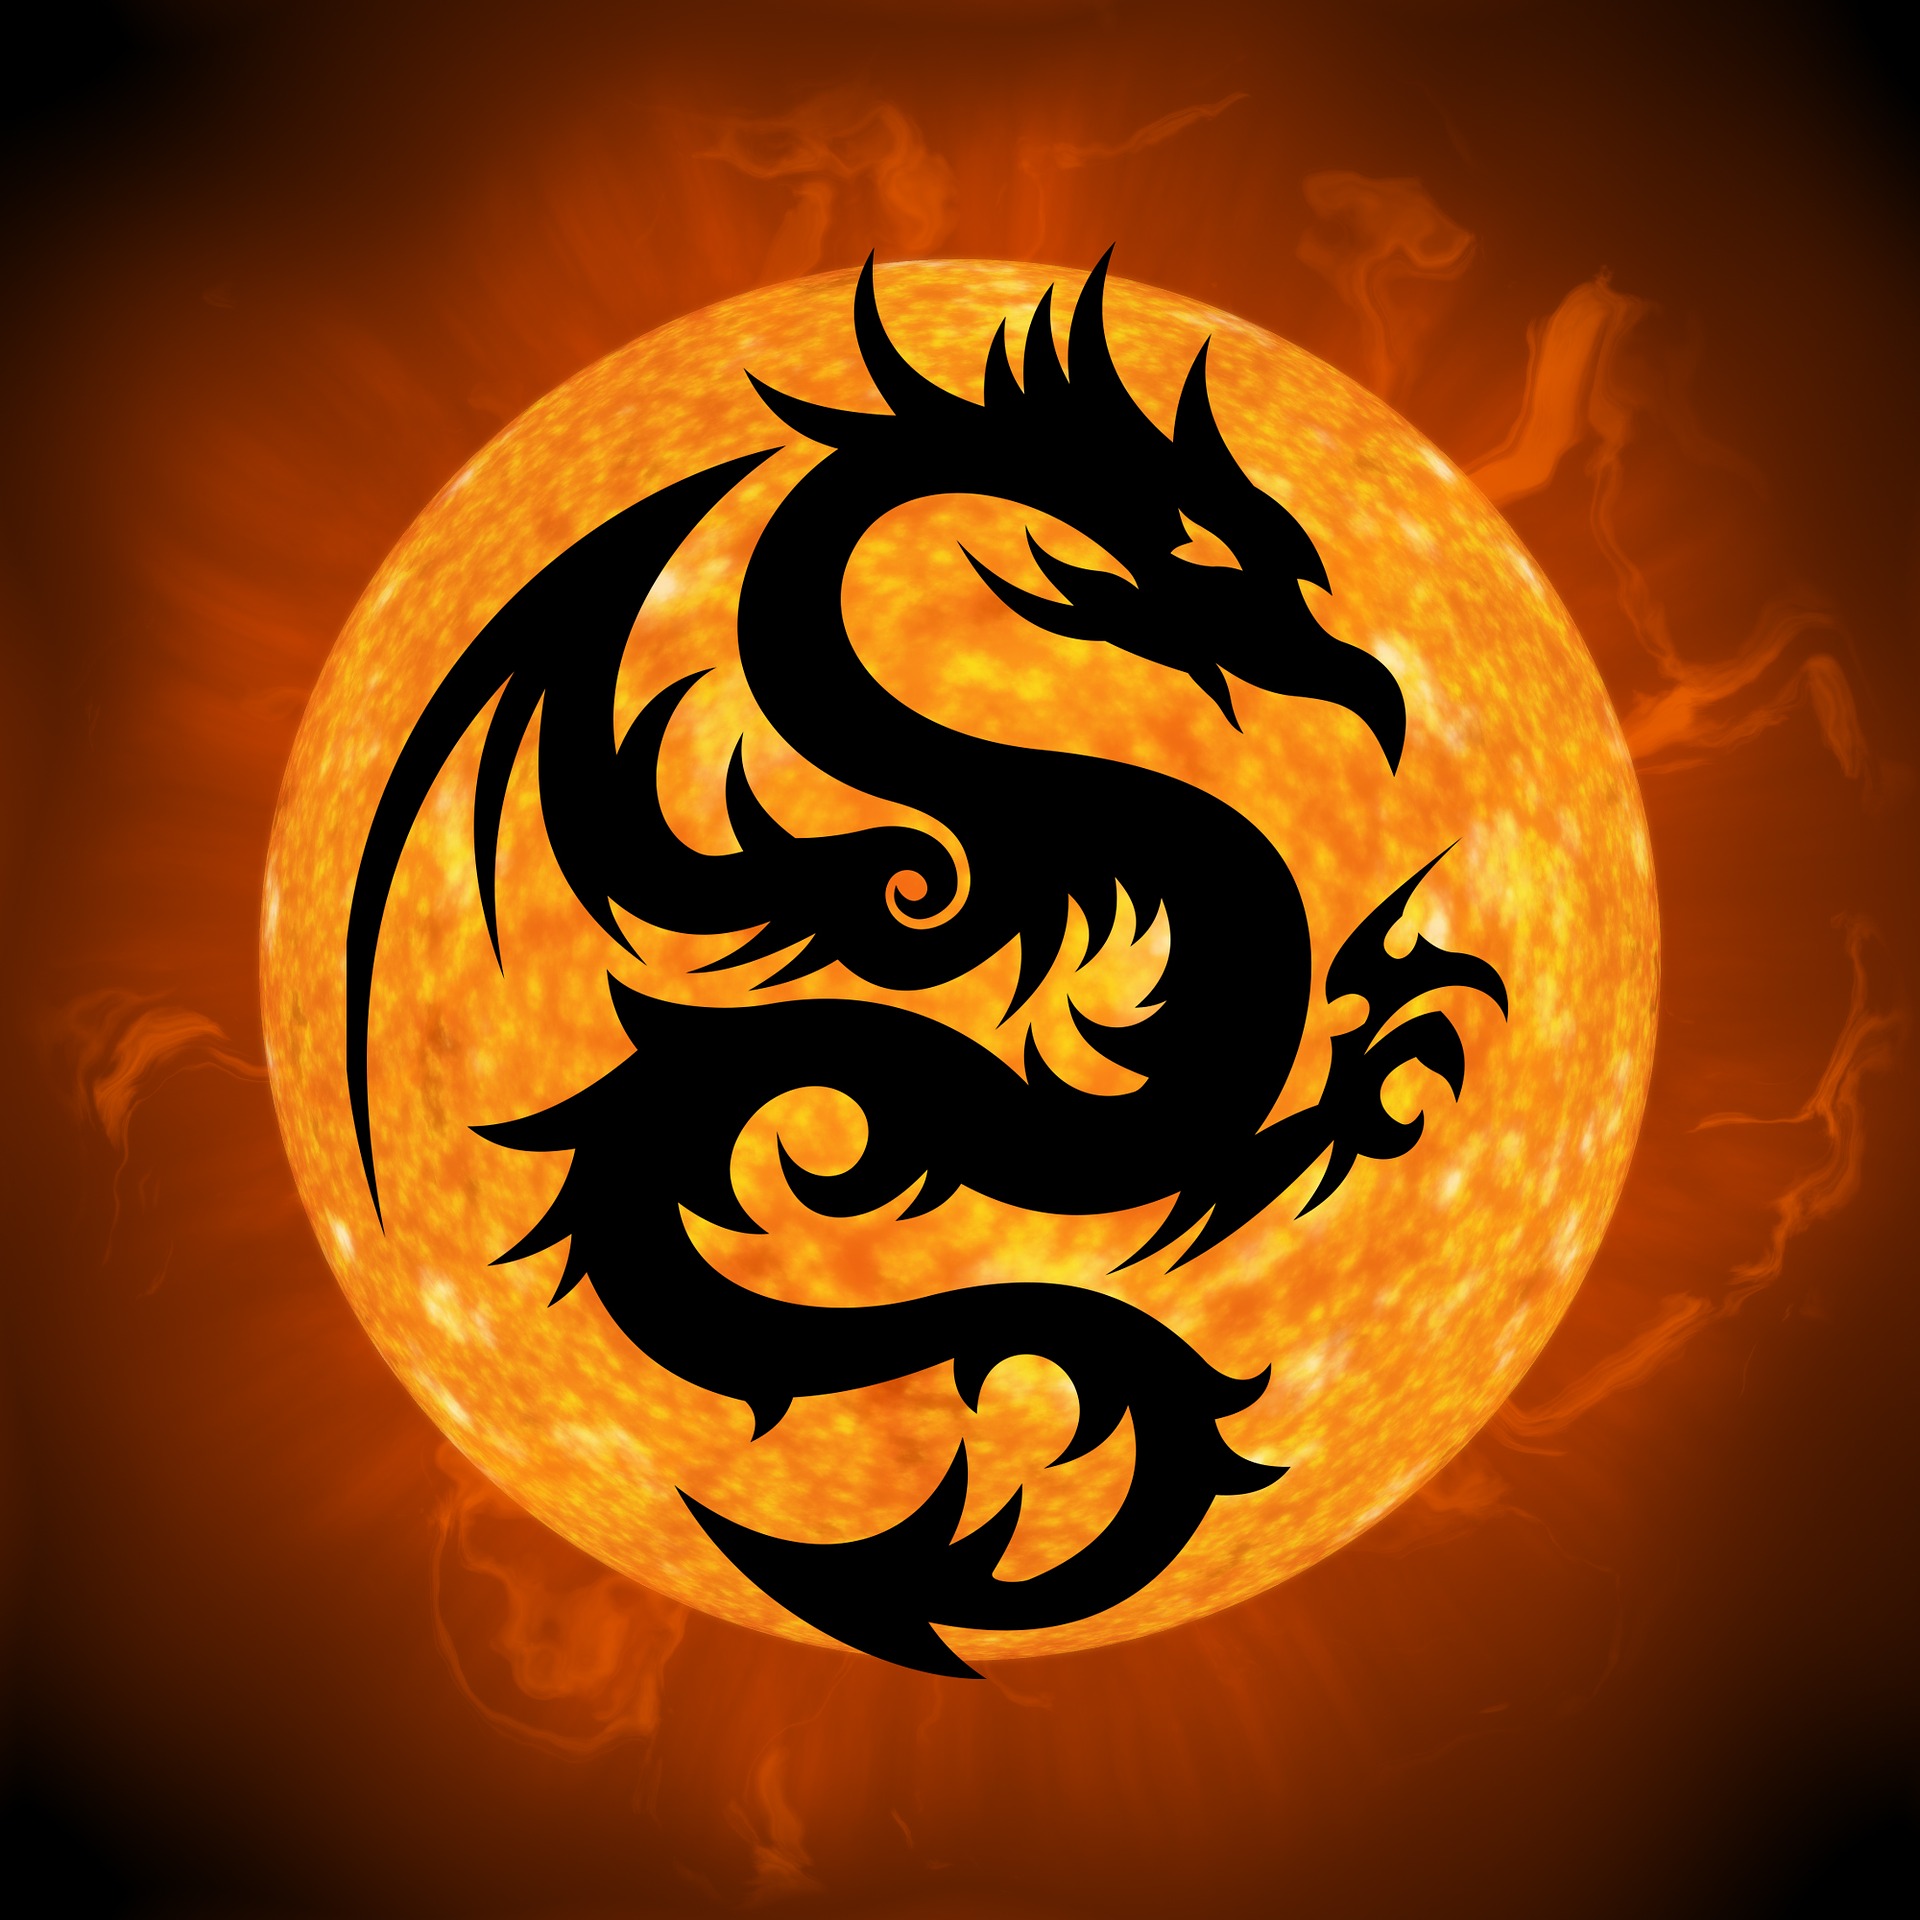 Fire Dragon of Protection Empowerment